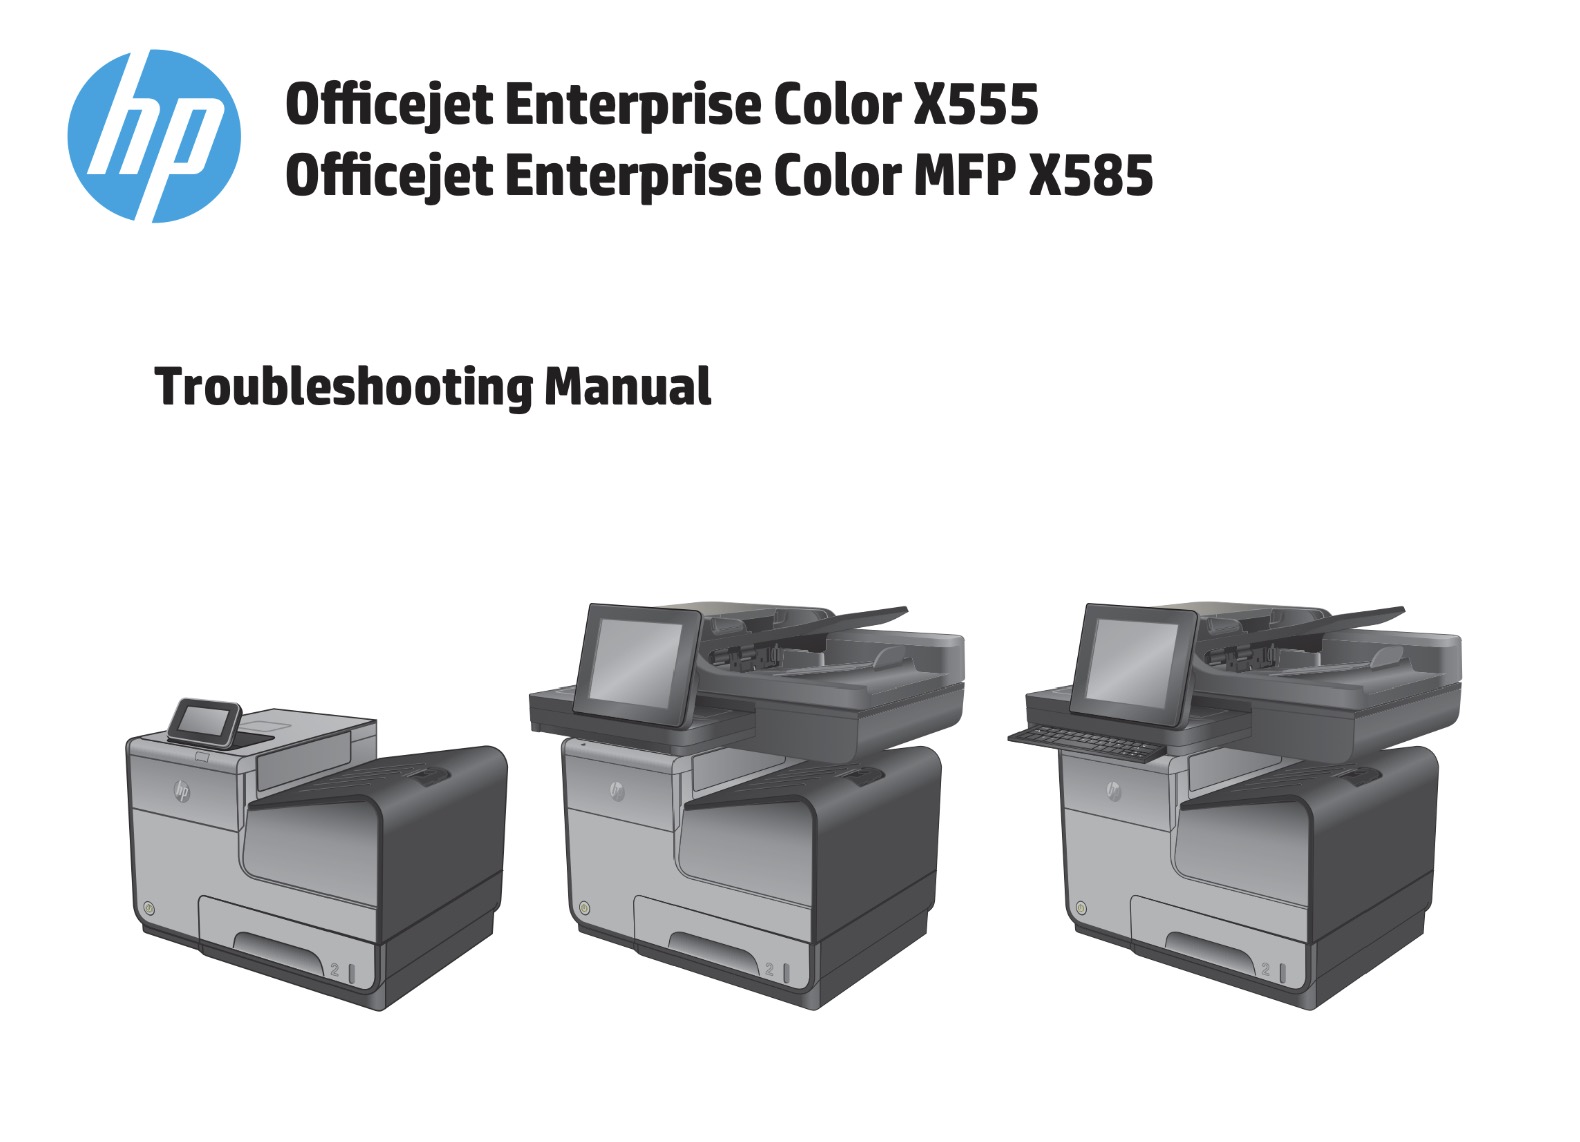 HP Officejet Enterprise Color X555 and MFP  X585 Series Troubleshooting Manual and Diagrams